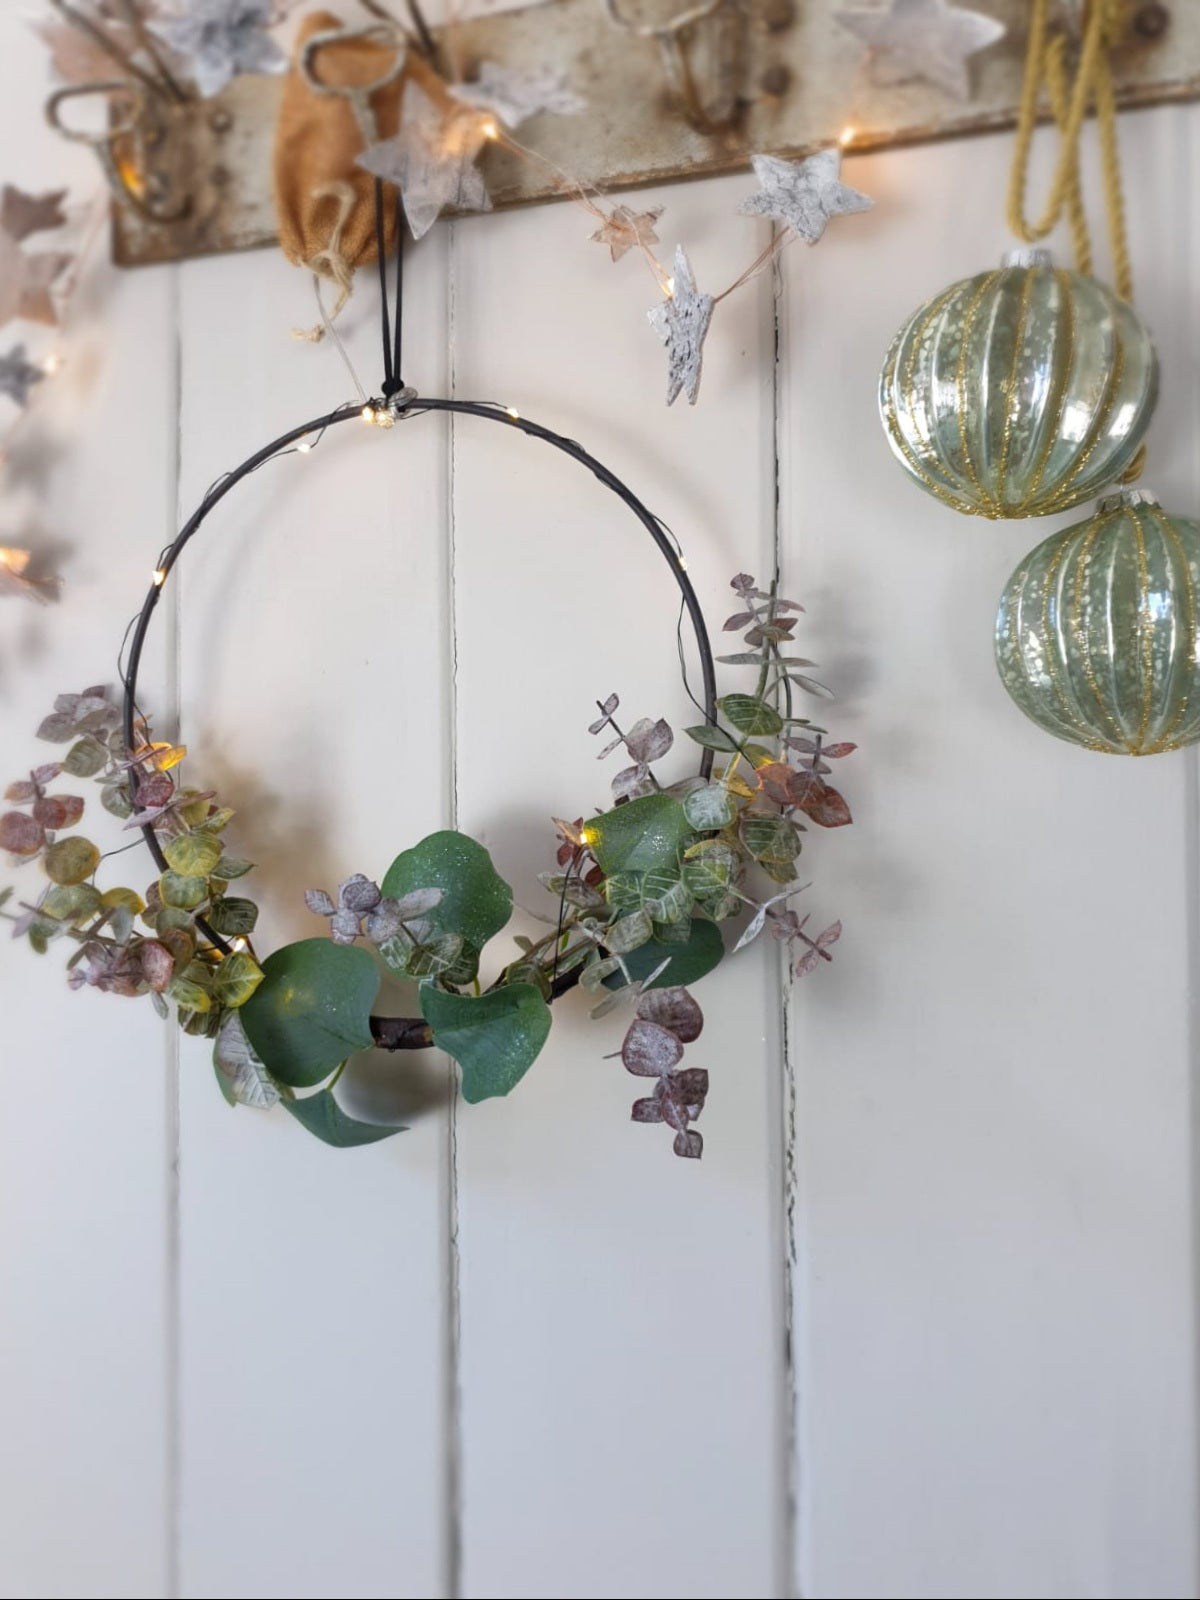 Hoop Wreath with green foliage - led lights